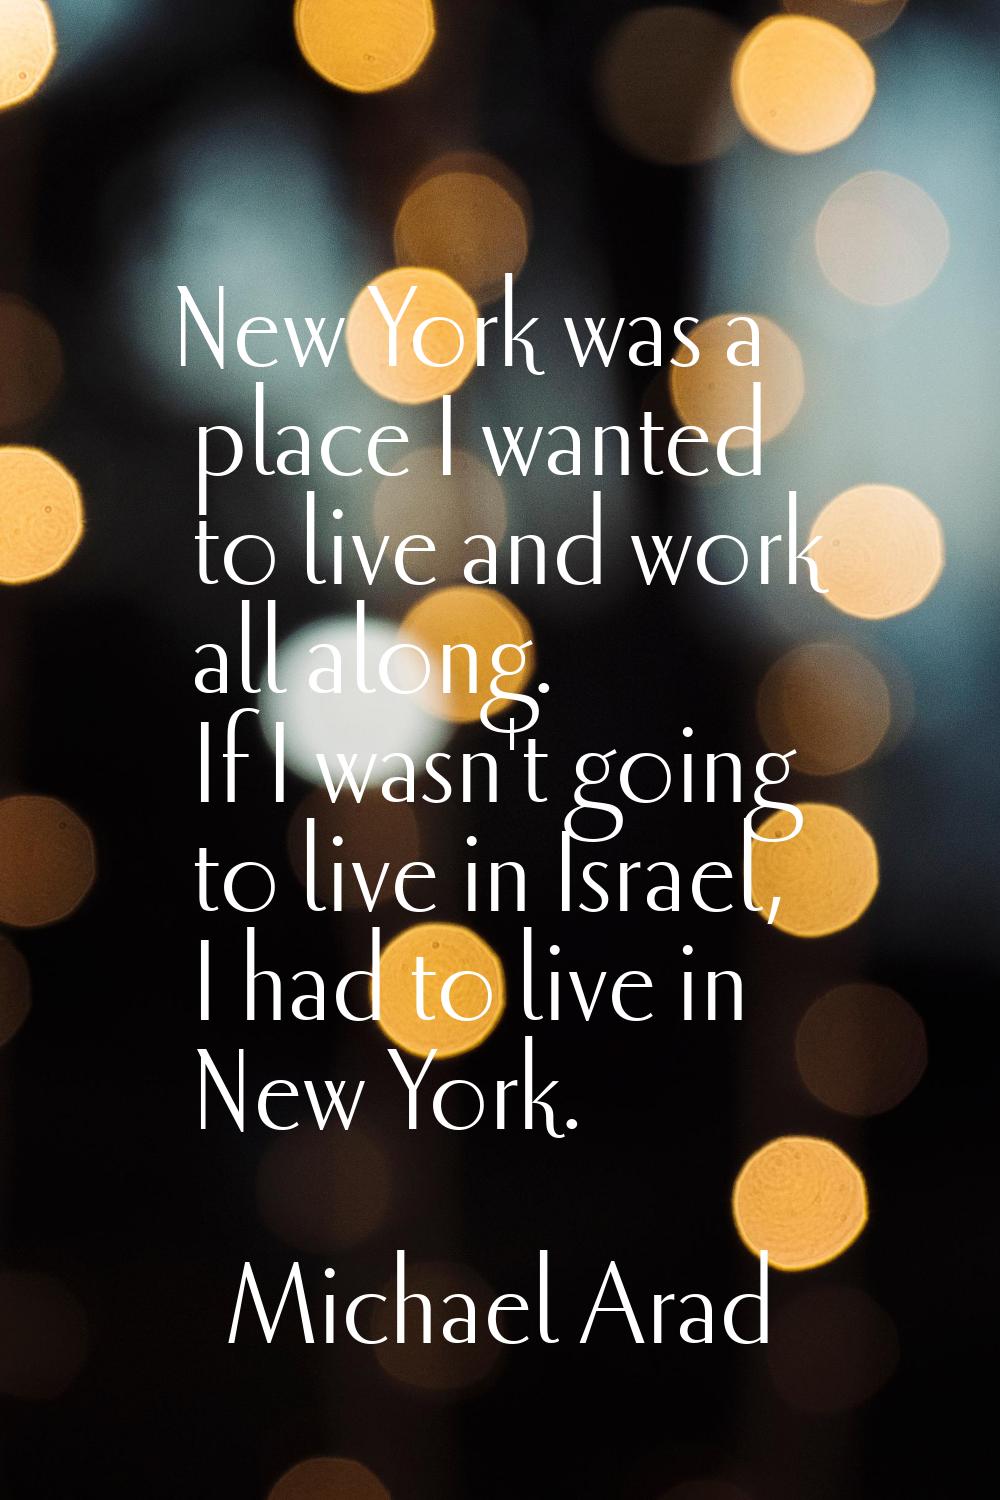 New York was a place I wanted to live and work all along. If I wasn't going to live in Israel, I ha